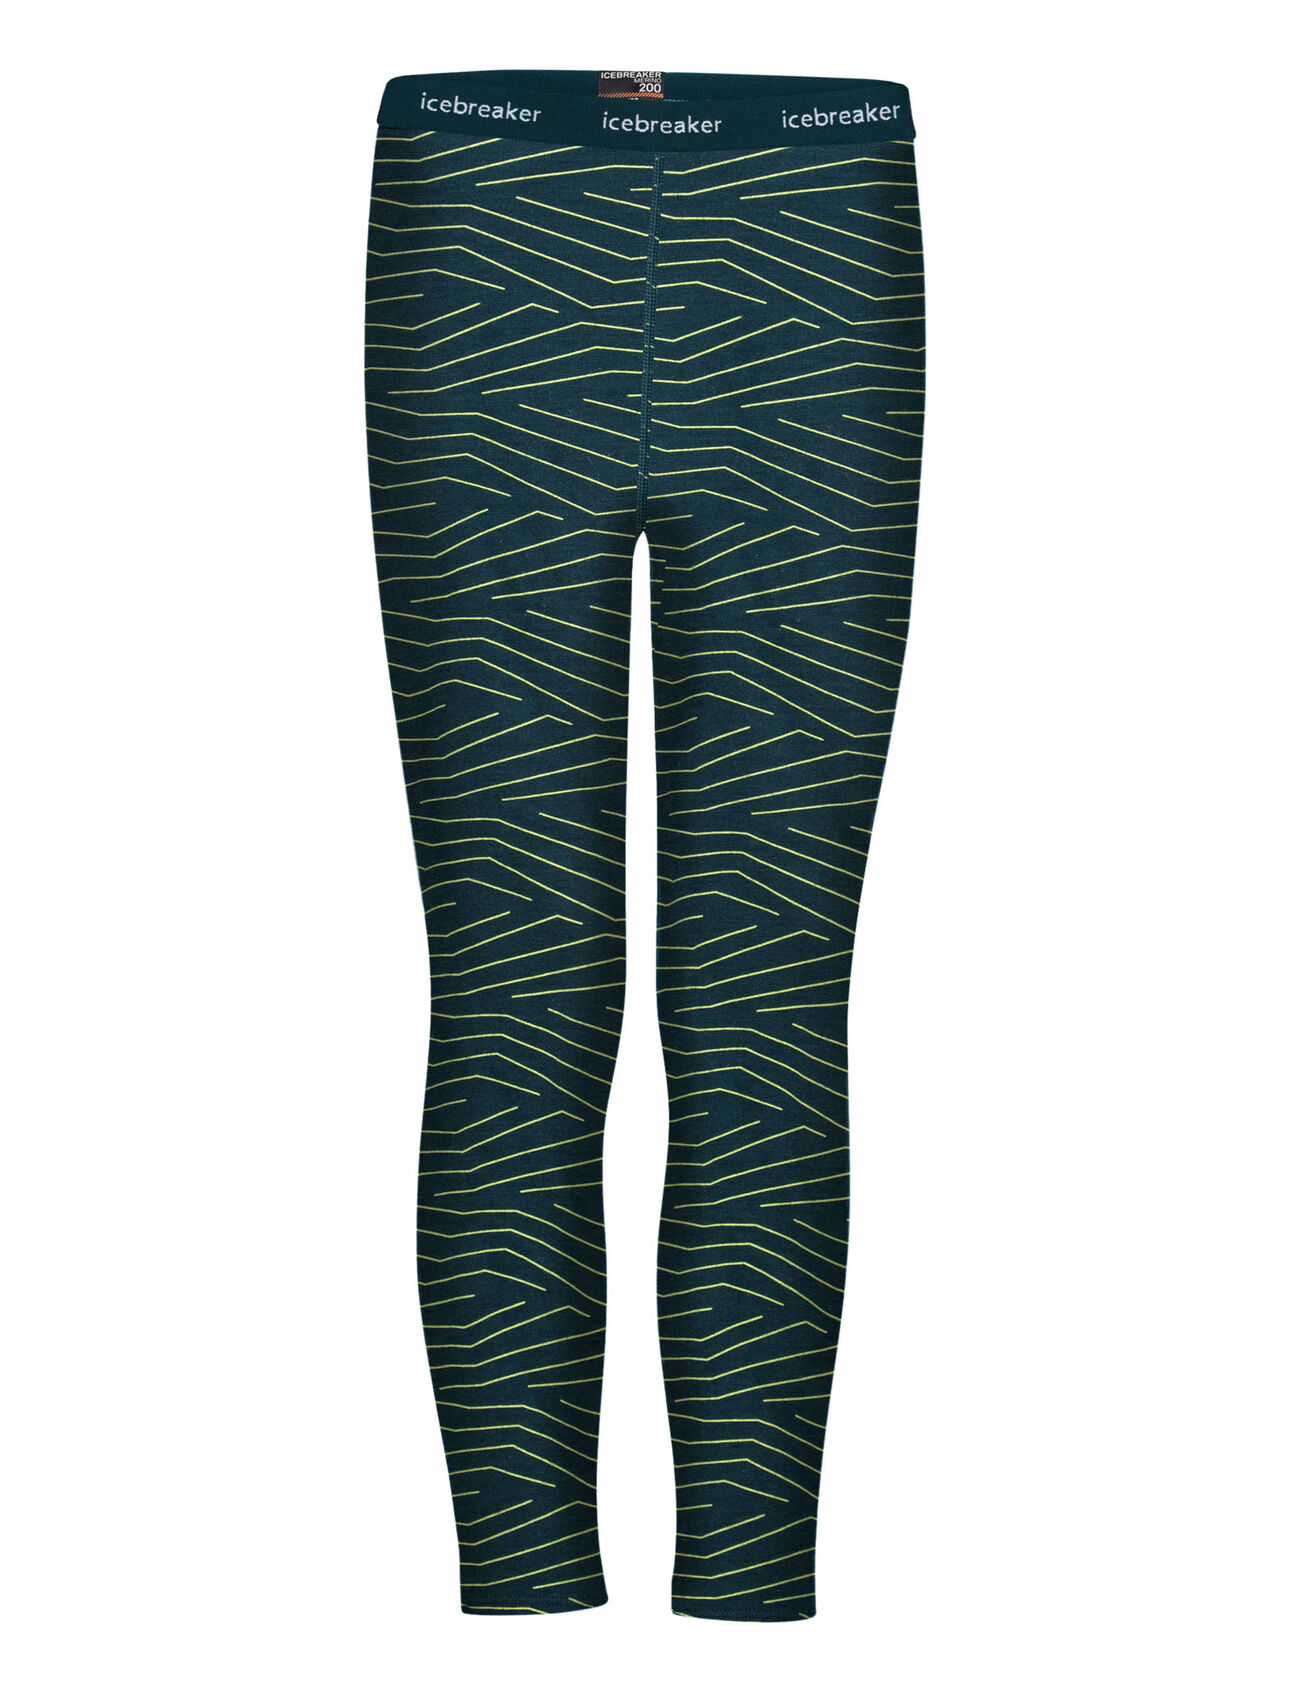 Kids Merino 200 Oasis Thermal Leggings Napasoq Lines Lightweight wool base layer bottoms for year-round layering performance, the soft and breathable 200 Oasis Leggings Napasoq Lines feature 100% merino wool jersey fabric.